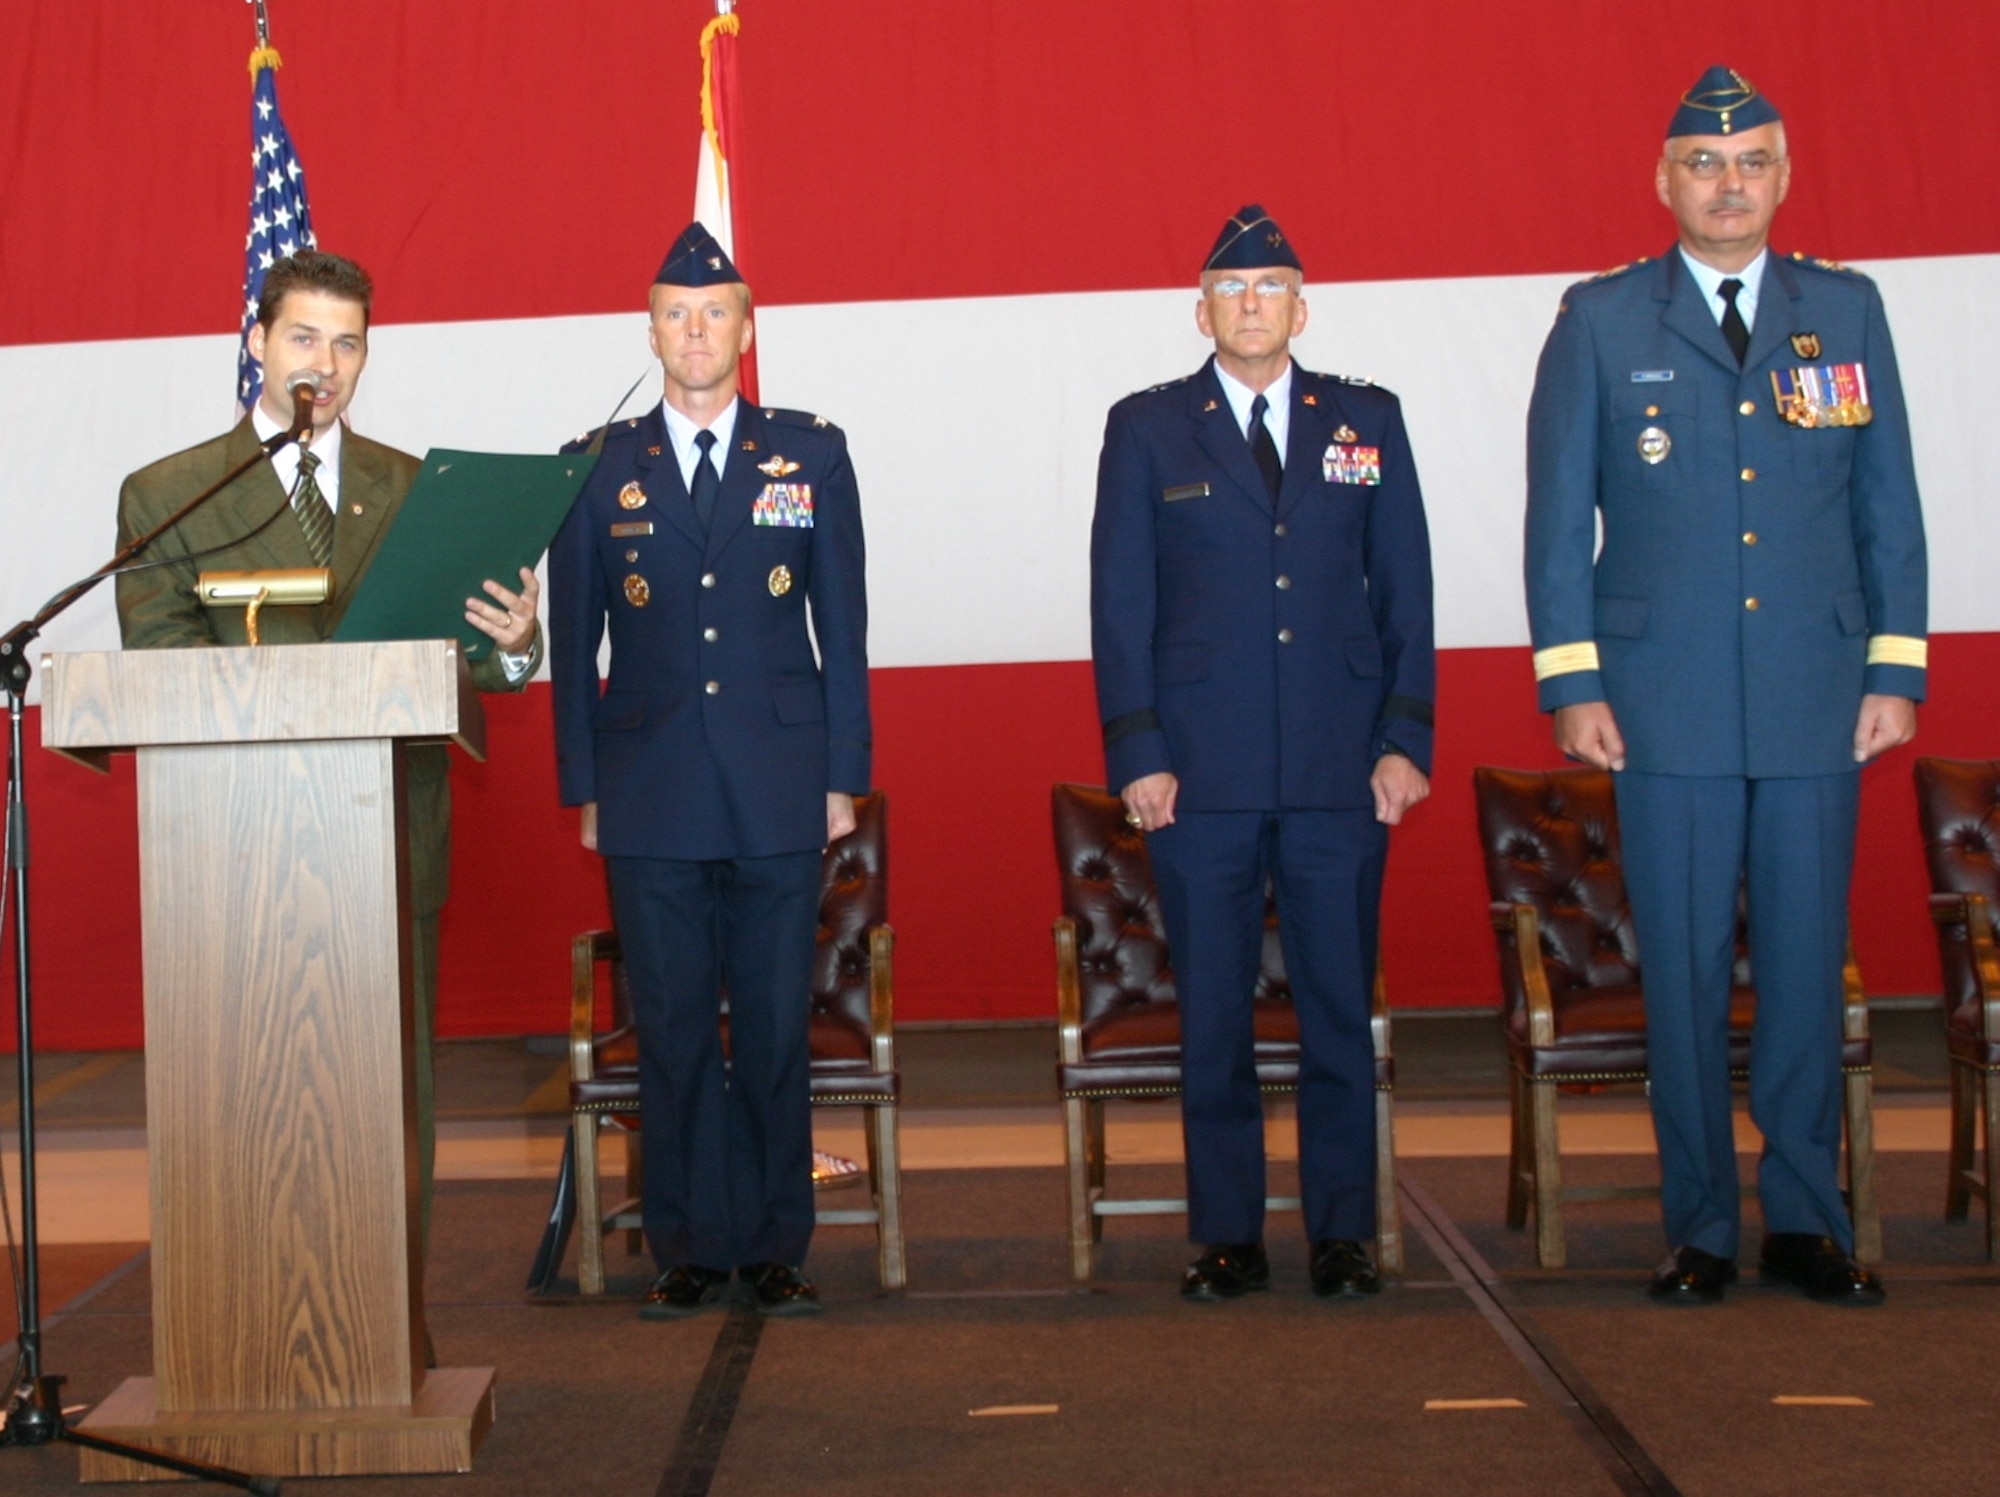 Representative Shane Jett reads the 30th Anniversary Canadian-American Partnership Proclamation during an official ceremony September 23. To his side are Col. Scott Forest, vice commander, 552 ACW, Maj. Gen. David Gillett, commander, OC-ALC, and Maj. Gen. Pierre Forgues, NORAD J3, Canadian Forces. Photo courtesy of 1st Lt. Kinder Blacke.